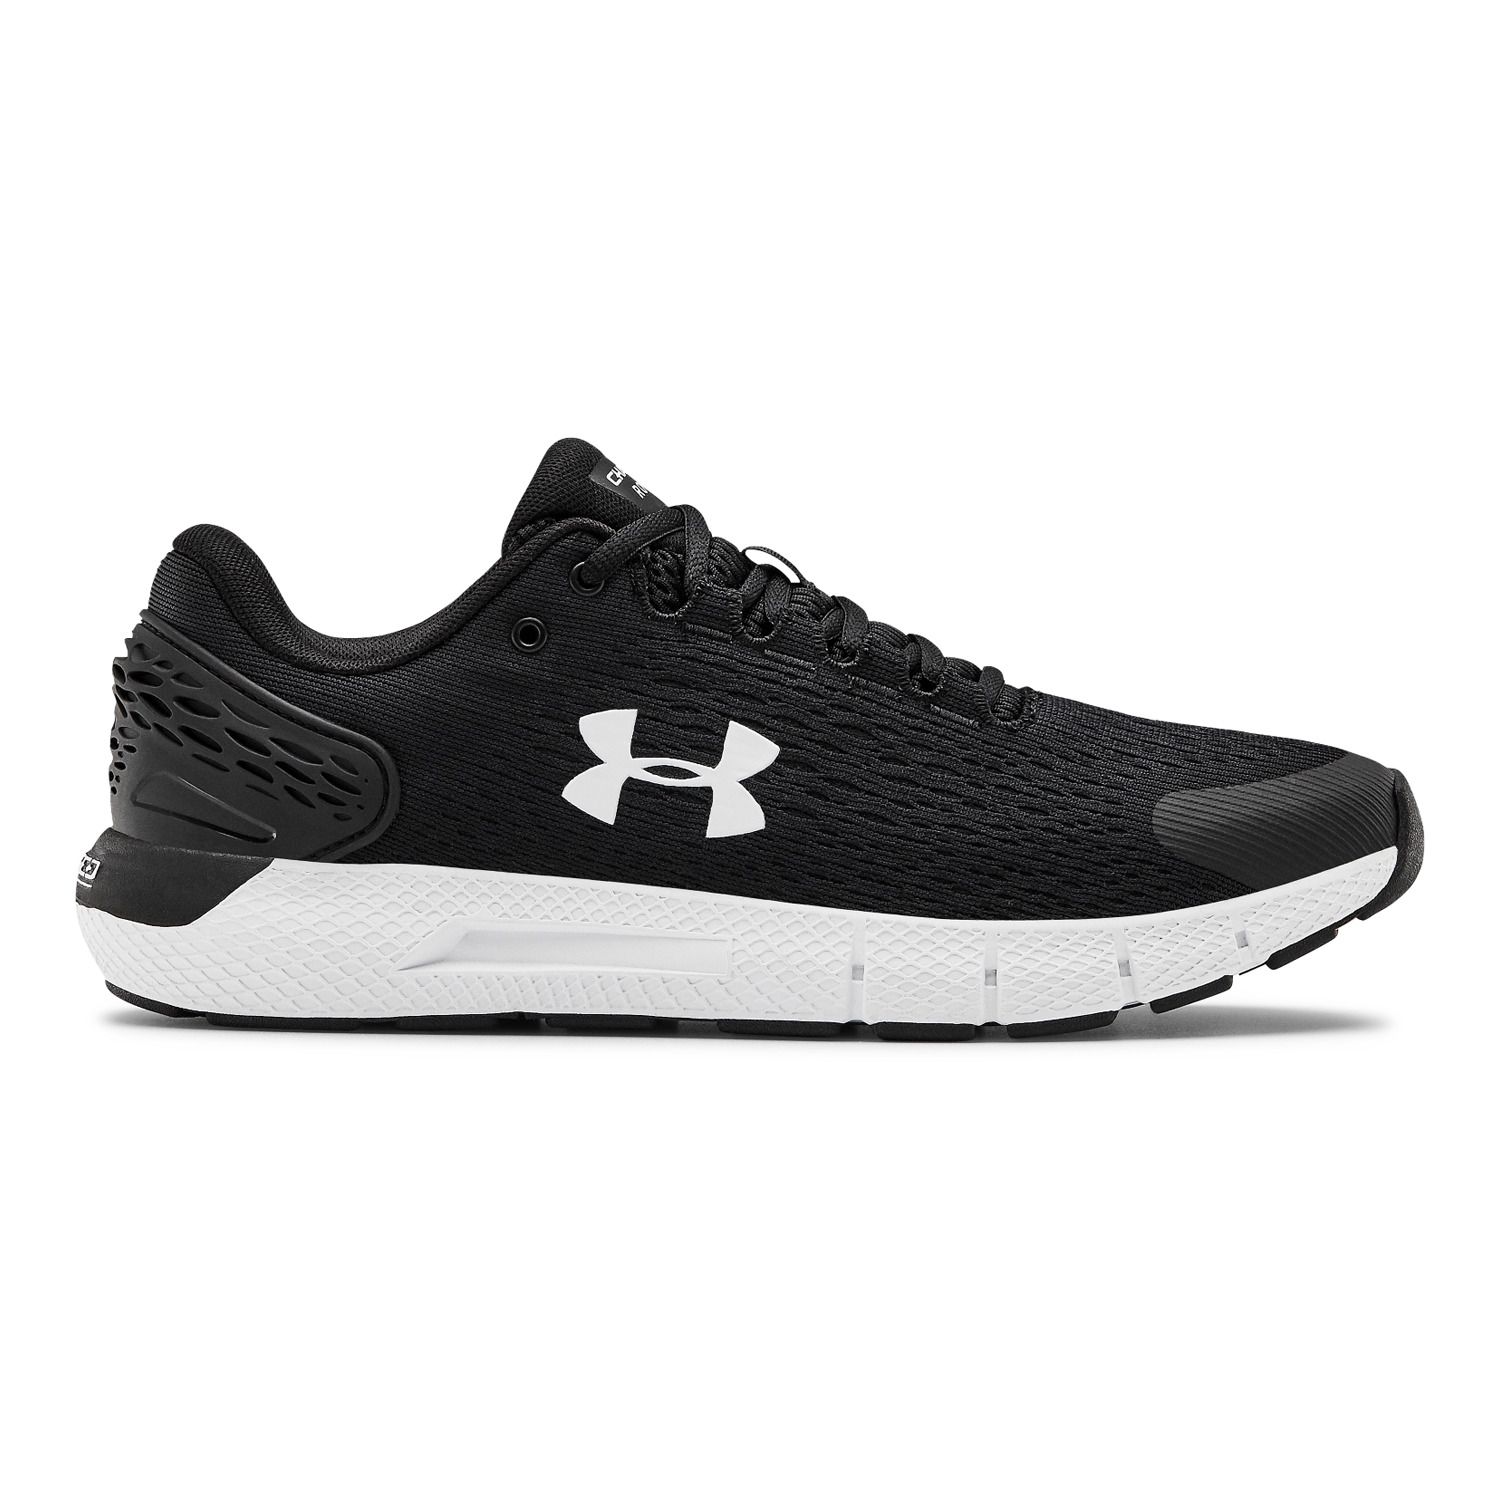 Under Armour Charged Rogue 2 Men's 